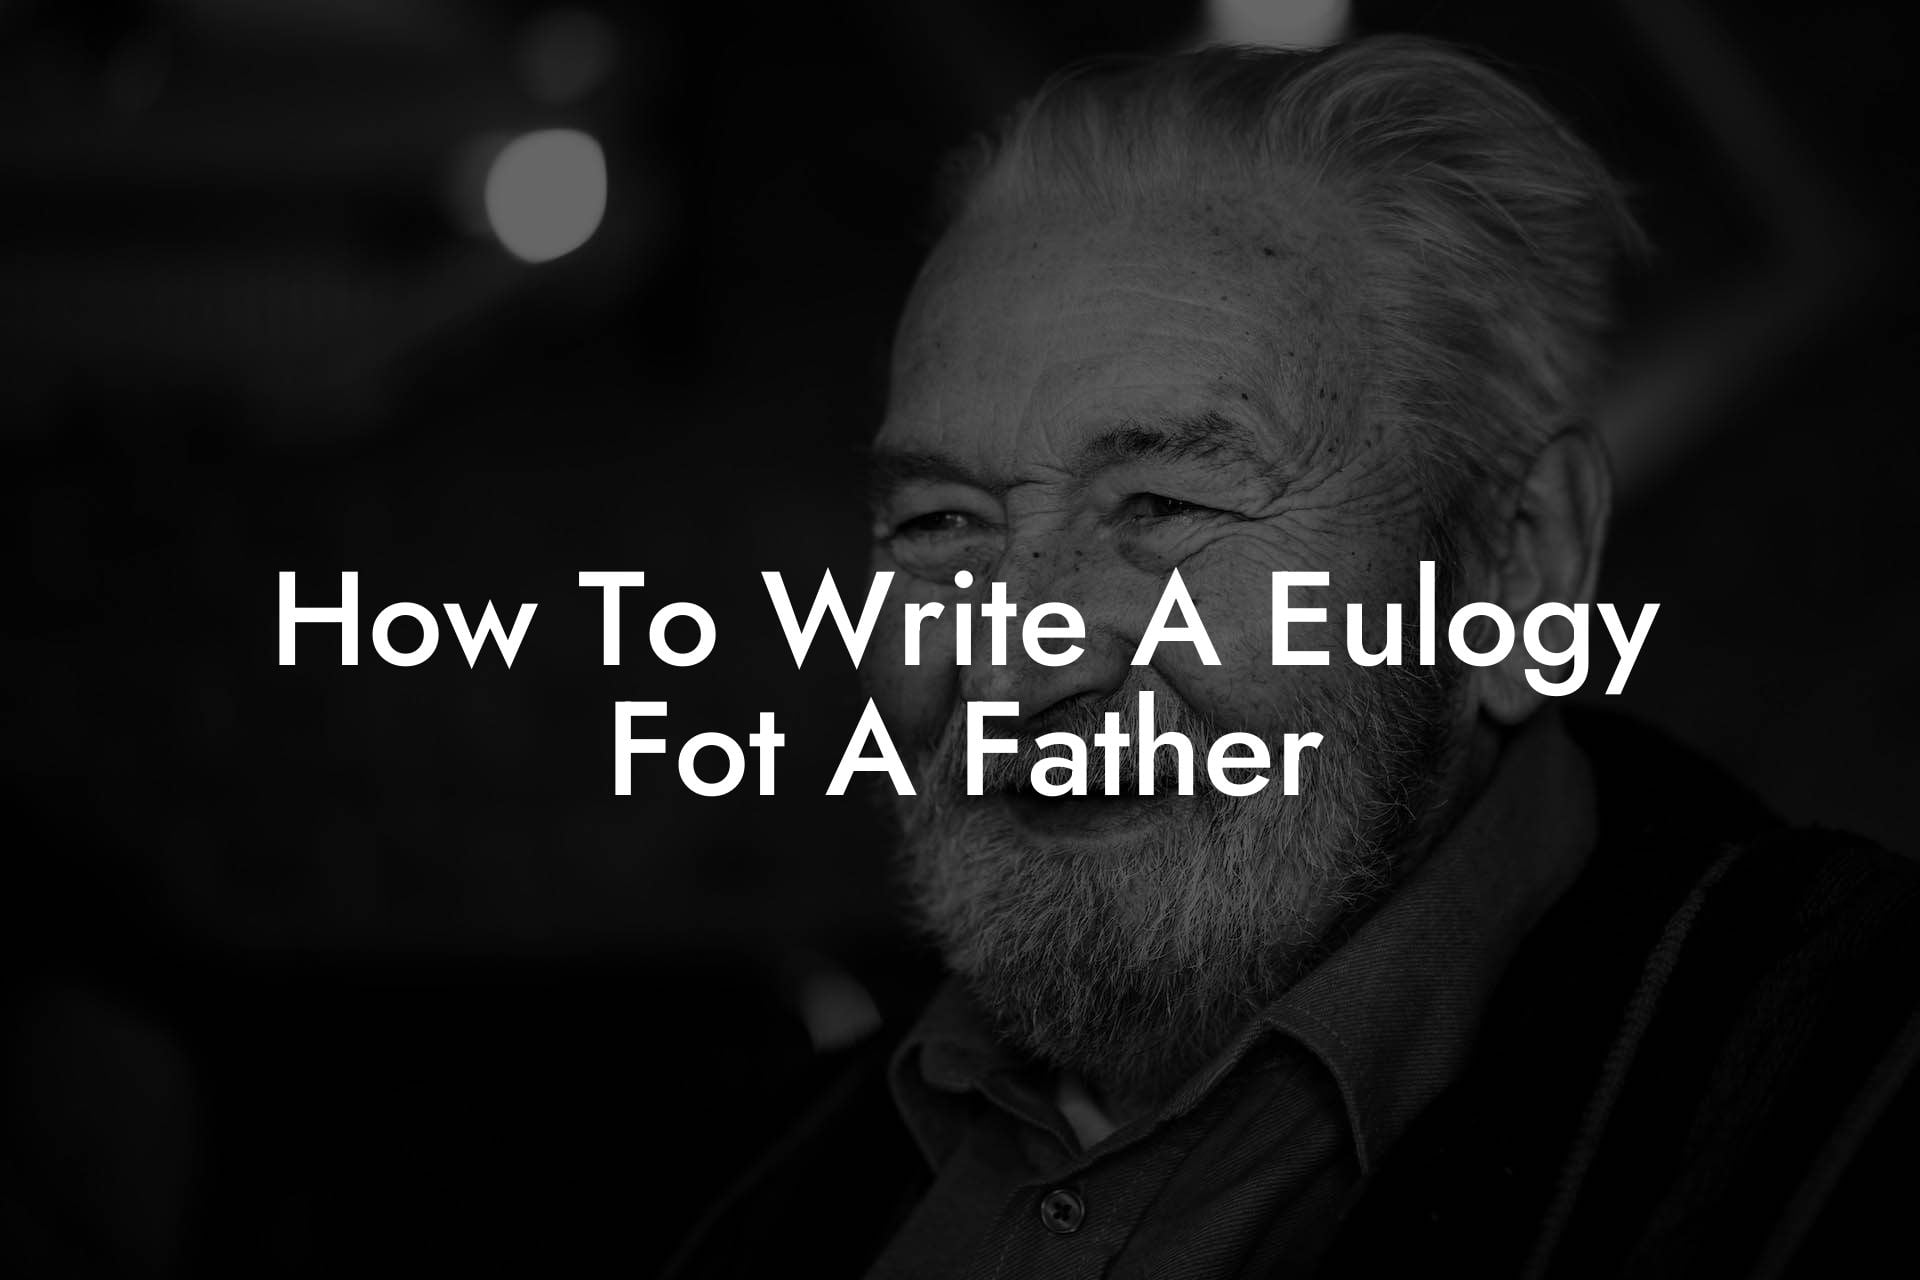 How To Write A Eulogy Fot A Father